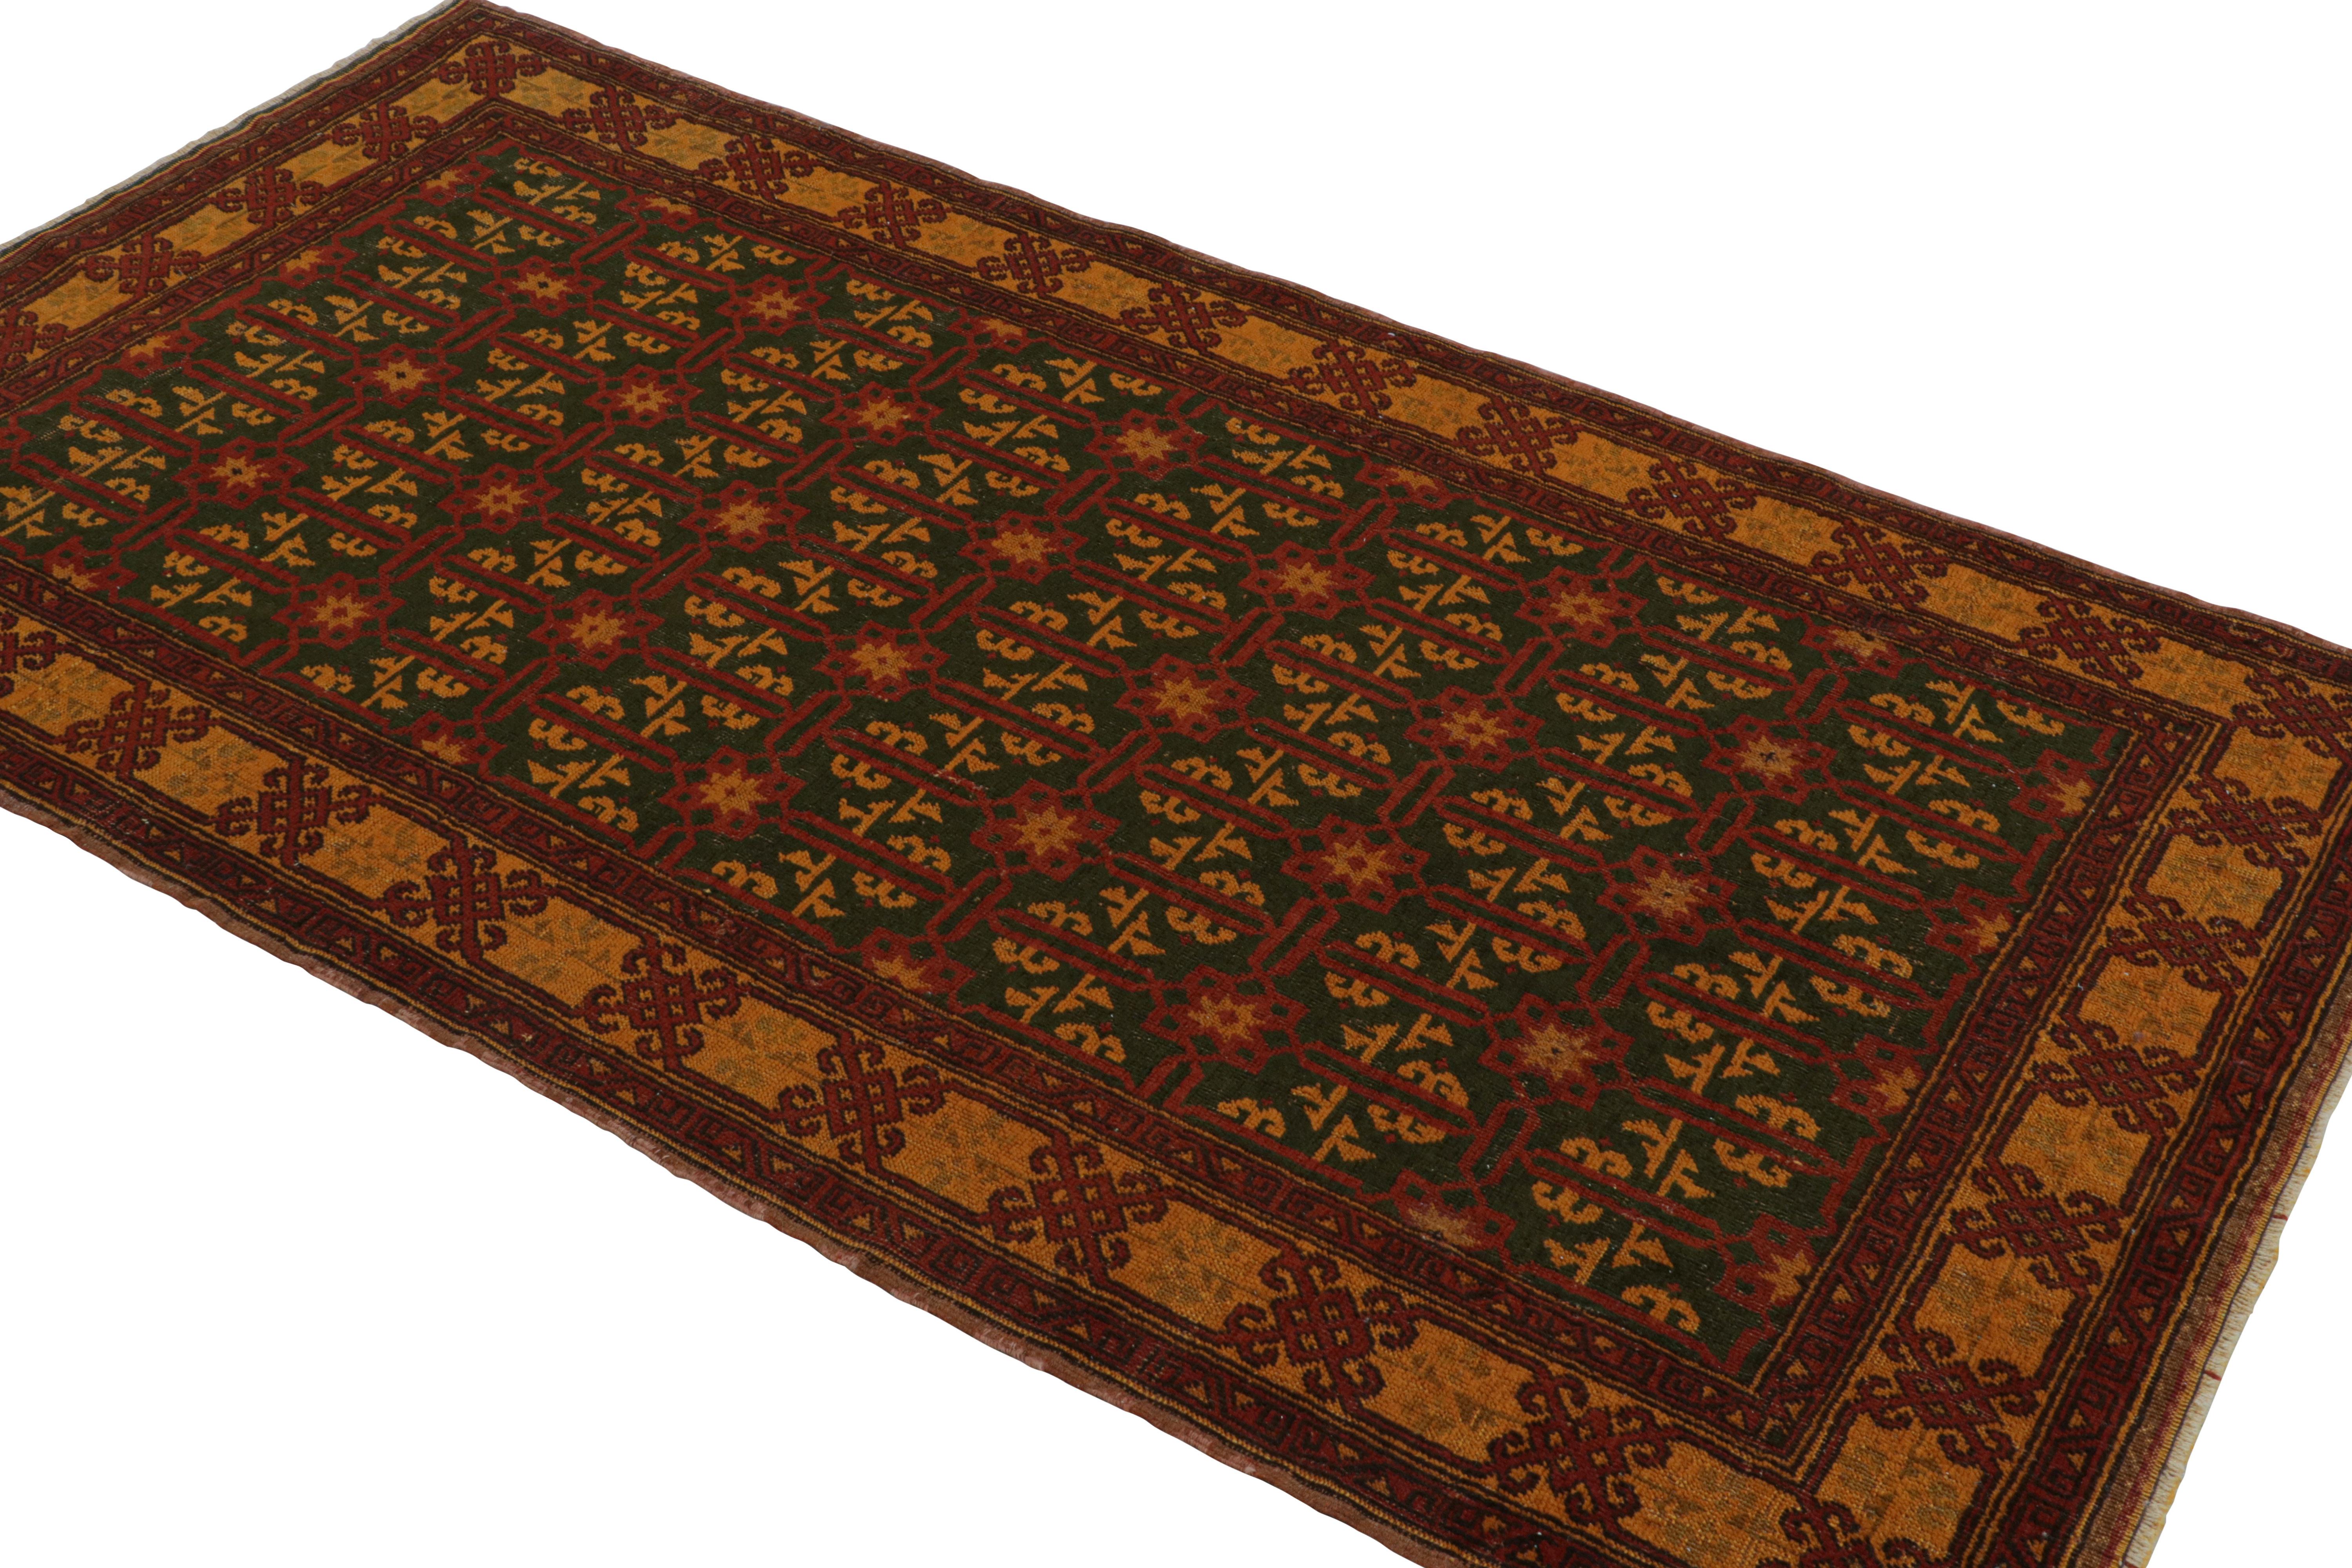 Hand-Knotted In Turkey Originating Between 1950-1960, This Vintage Mid-Century Runner Joins Rug & Kilim's Hand-Selected Rarities From The Period. This Piece Is Unique Among The Collection For A Bold Marriage Of Rich Crimson Red, Green And Orange